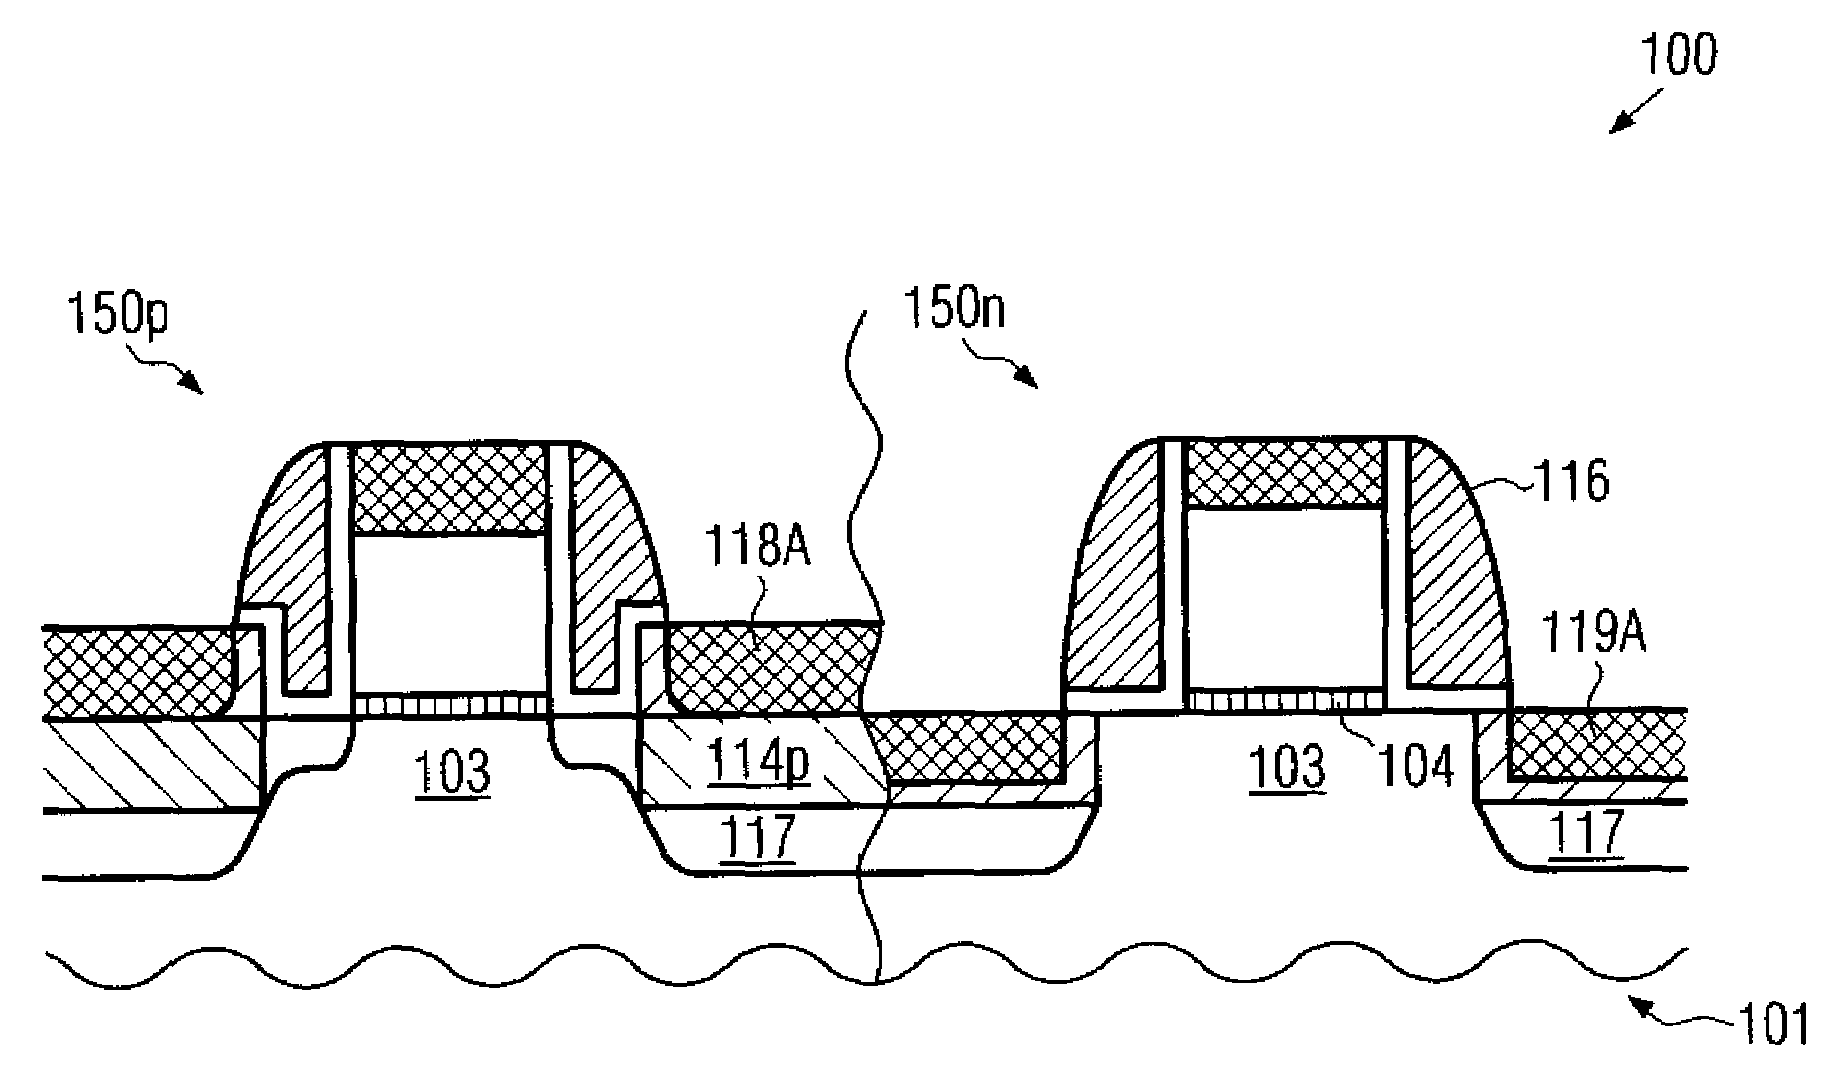 Different embedded strain layers in PMOS and NMOS transistors and a method of forming the same